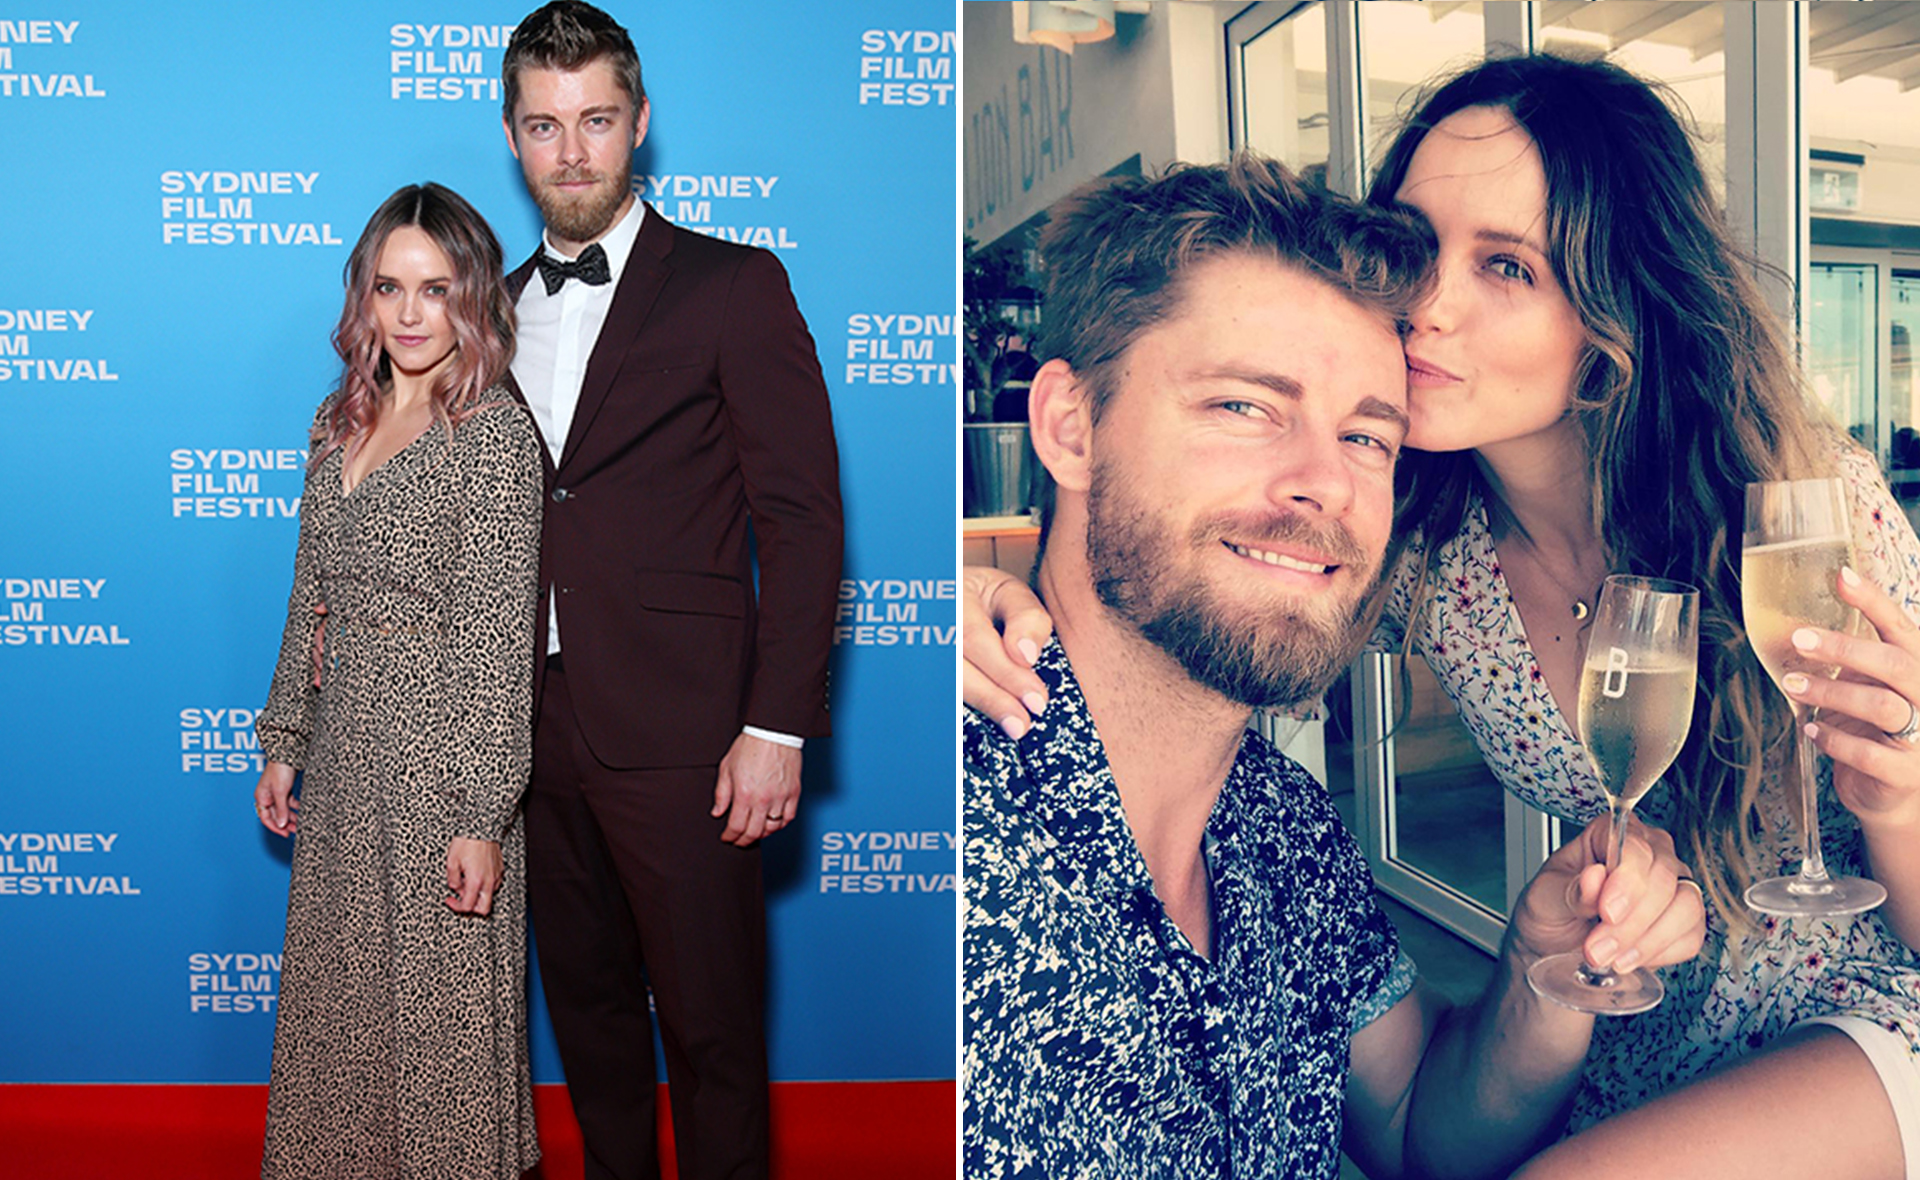 These pictures prove that Home and Away sweethearts Luke Mitchell and Rebecca Breeds are the soap’s biggest success story